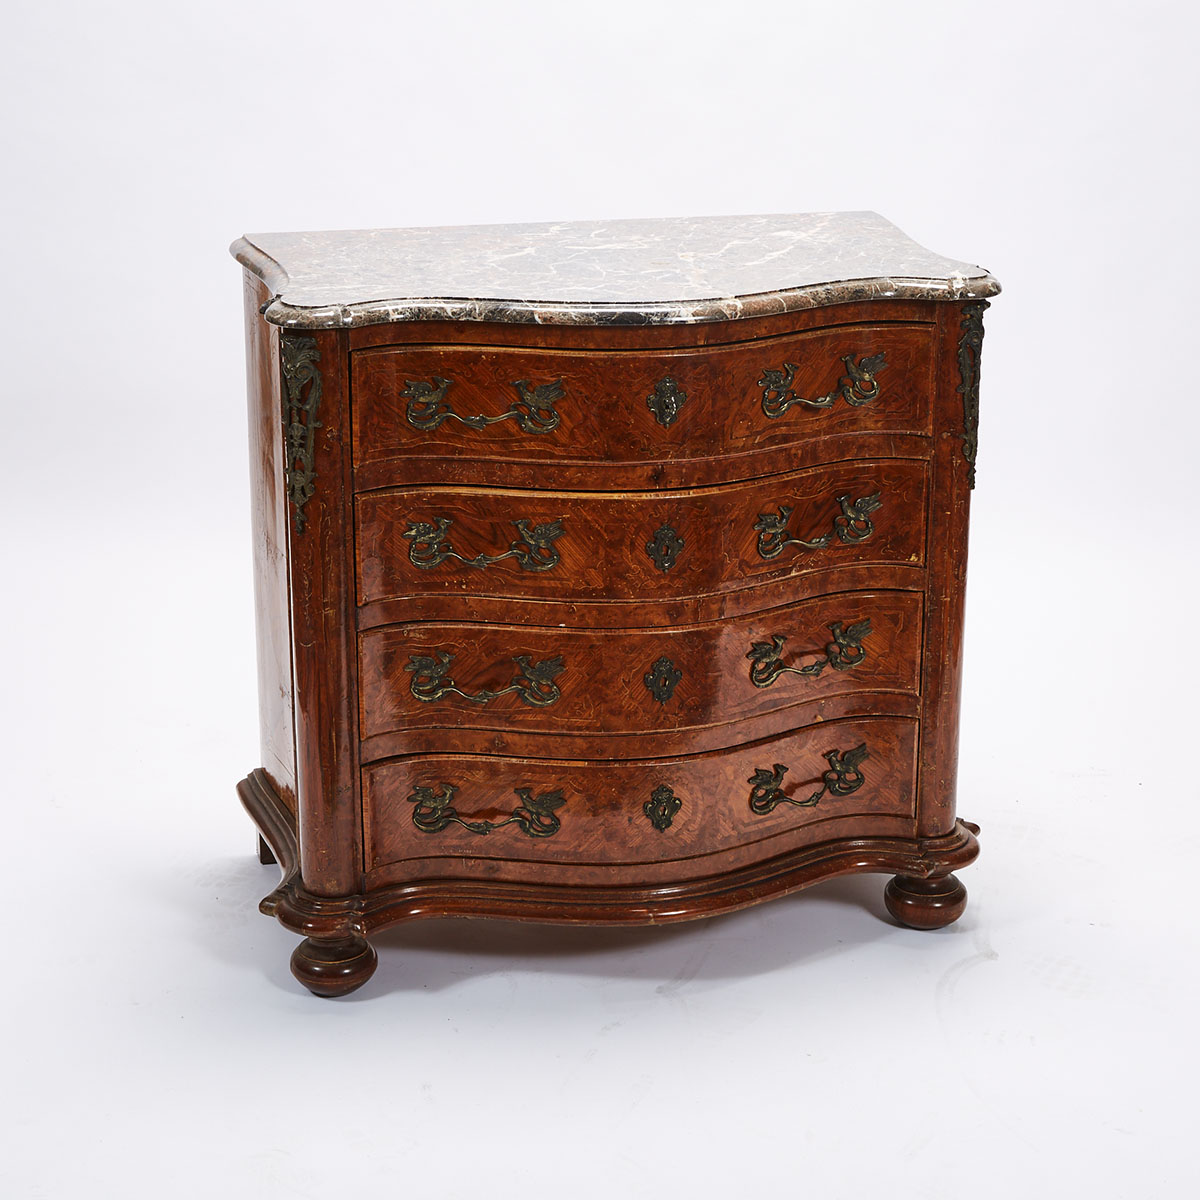 Italian Kingwood and Burl Walnut Parquetry Serpentine Front Commode, late 19th century